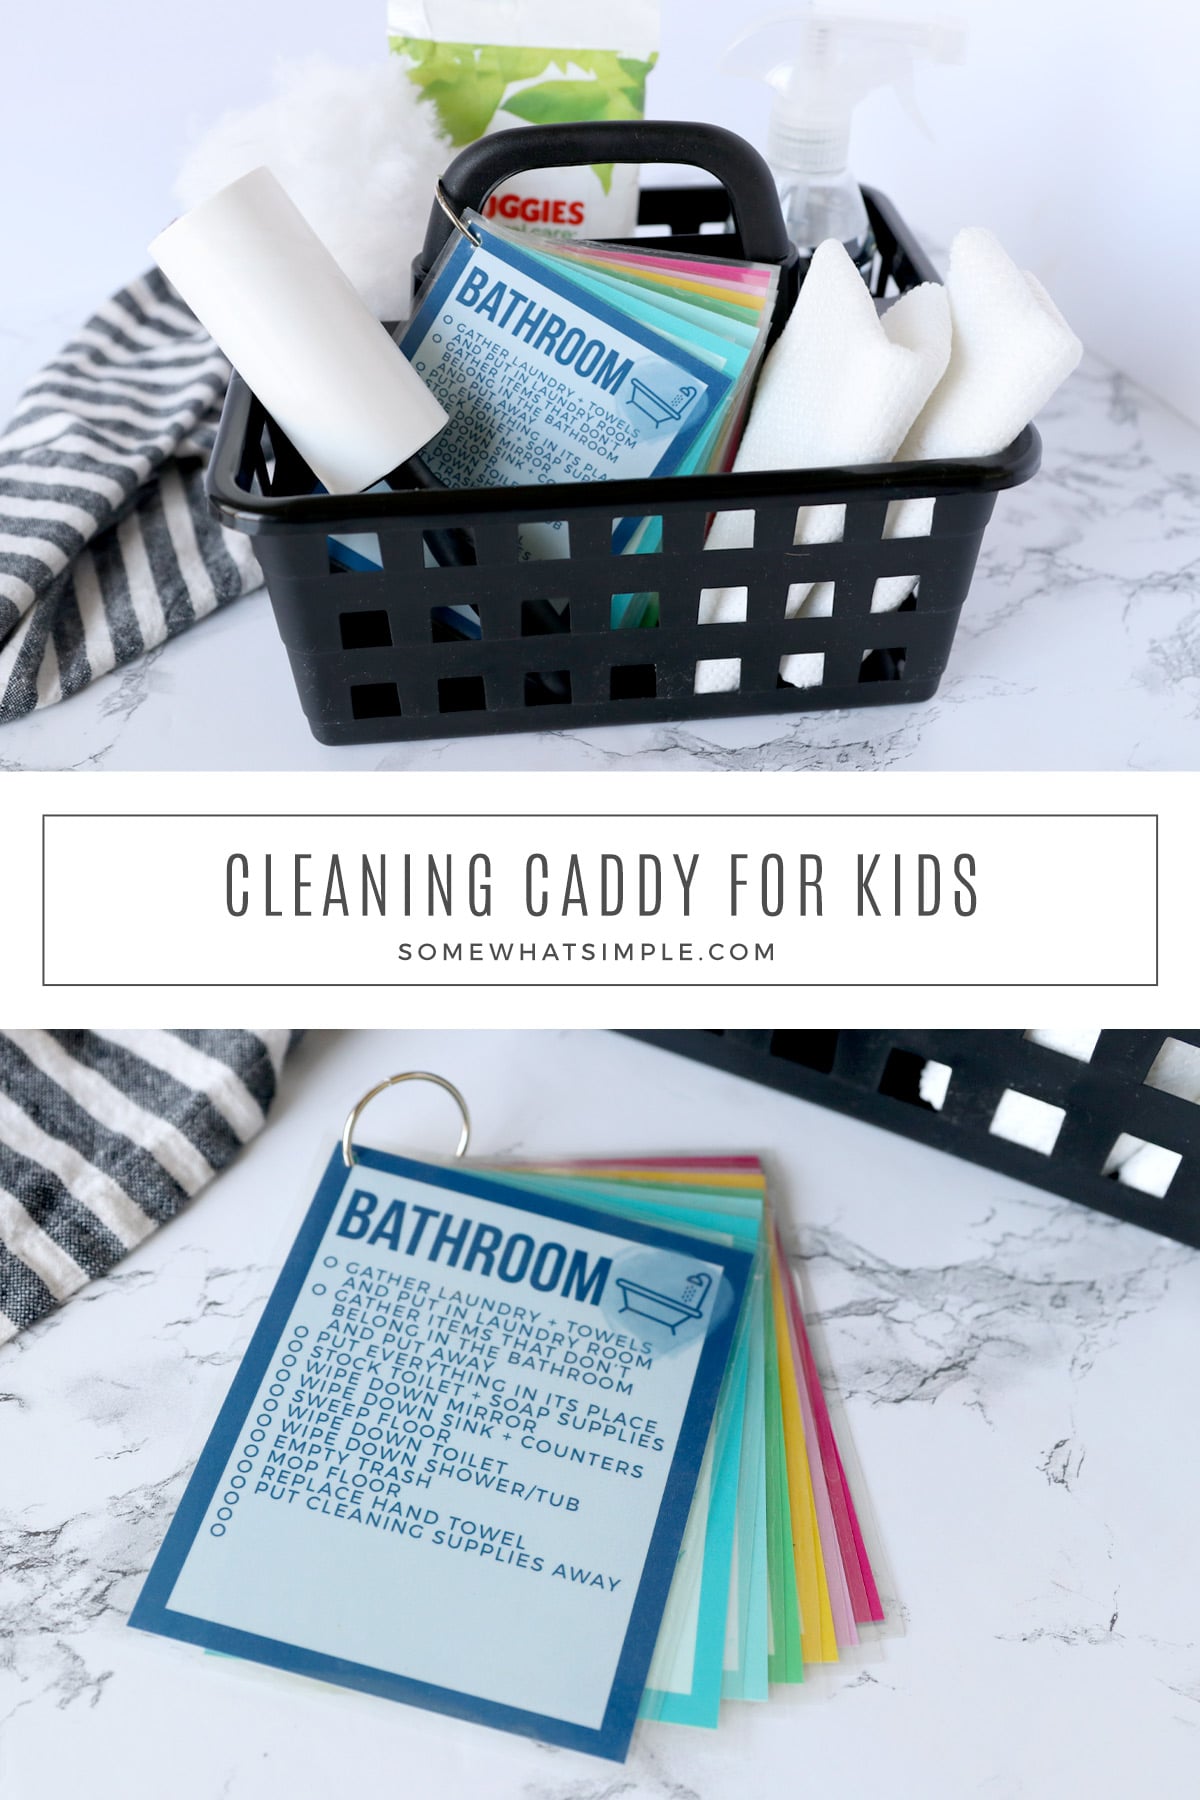 https://www.somewhatsimple.com/wp-content/uploads/2022/06/kid-cleaning-kit-caddy.jpg